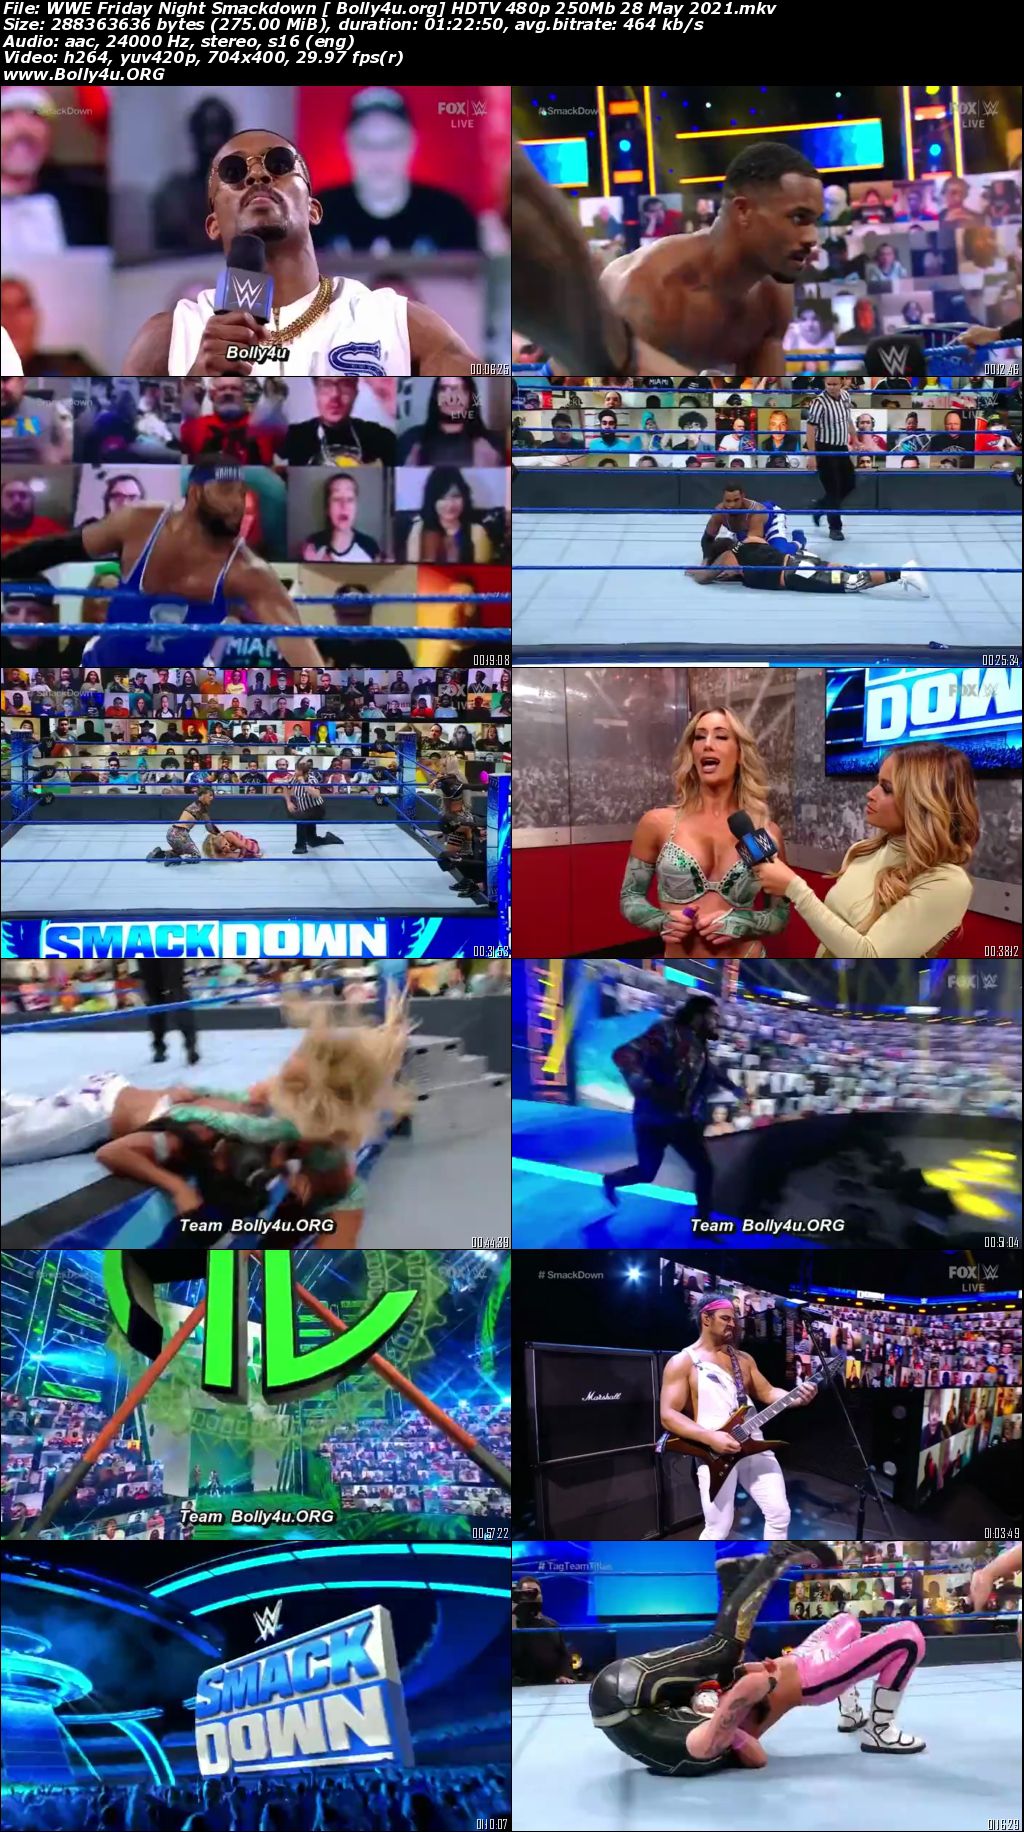 WWE Friday Night Smackdown HDTV 480p 250Mb 28 May 2021 Download